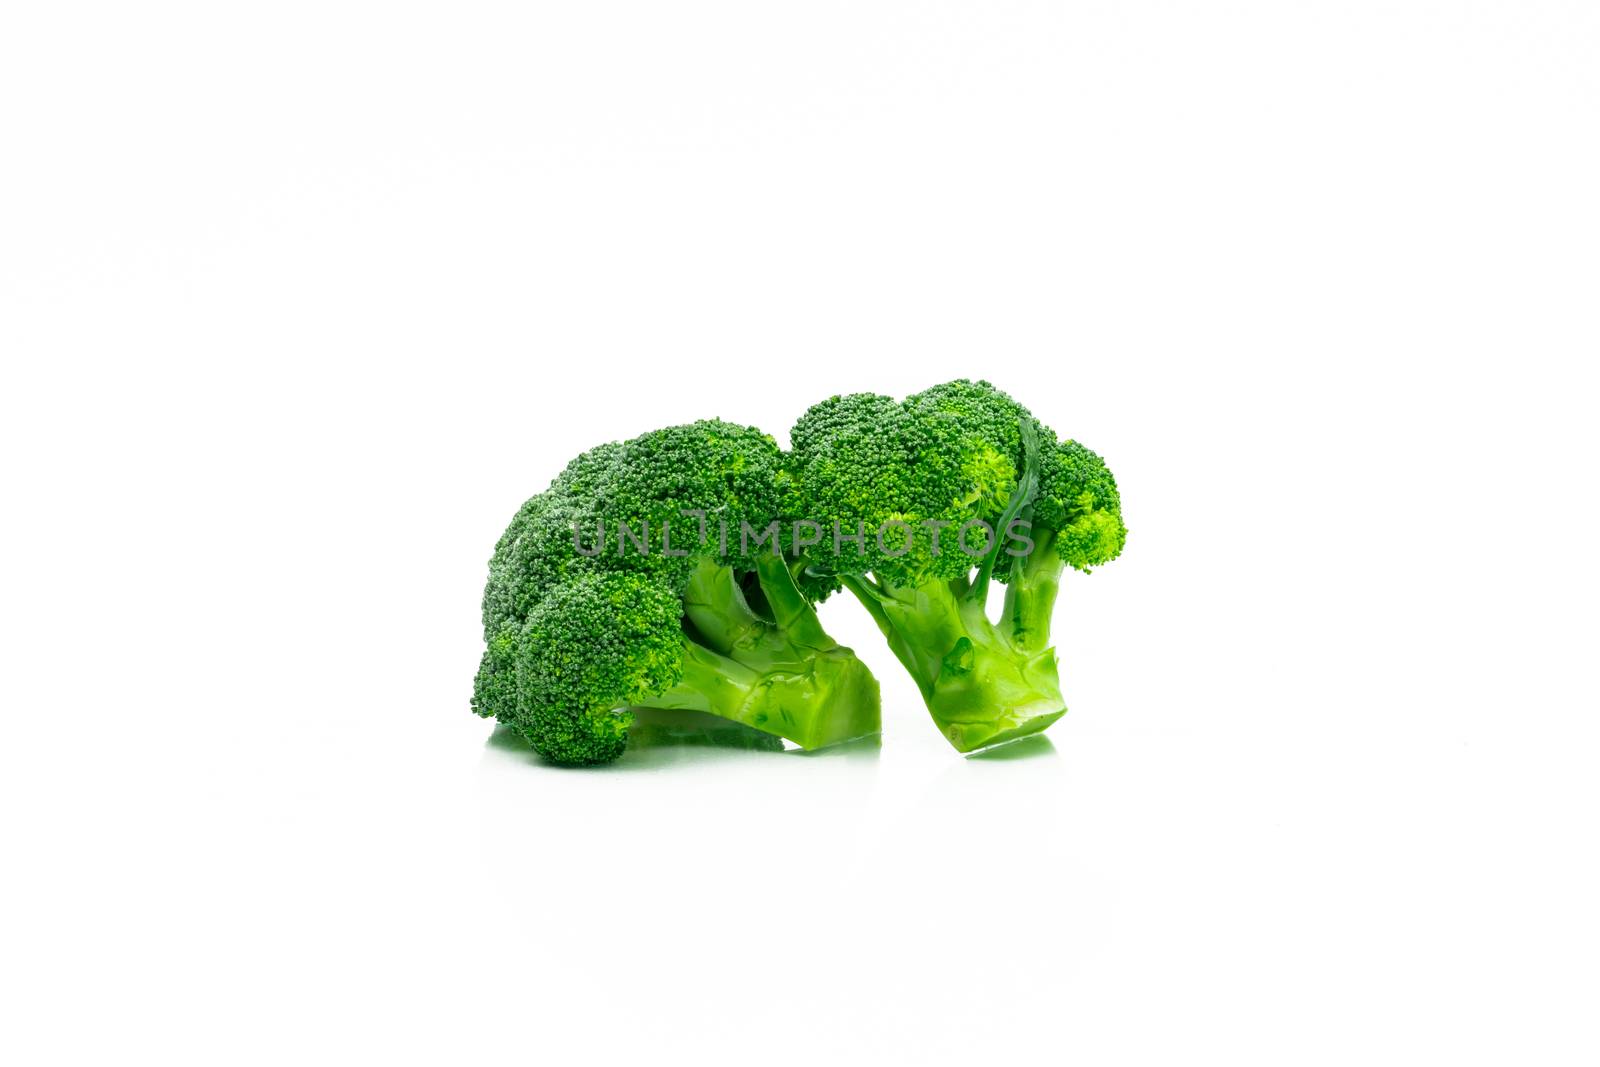 Set of green broccoli (Brassica oleracea). Vegetables natural source of betacarotene, vitamin c, vitamin k, fiber food, folate. Fresh broccoli cabbage isolated on white background with copy space. by Fahroni